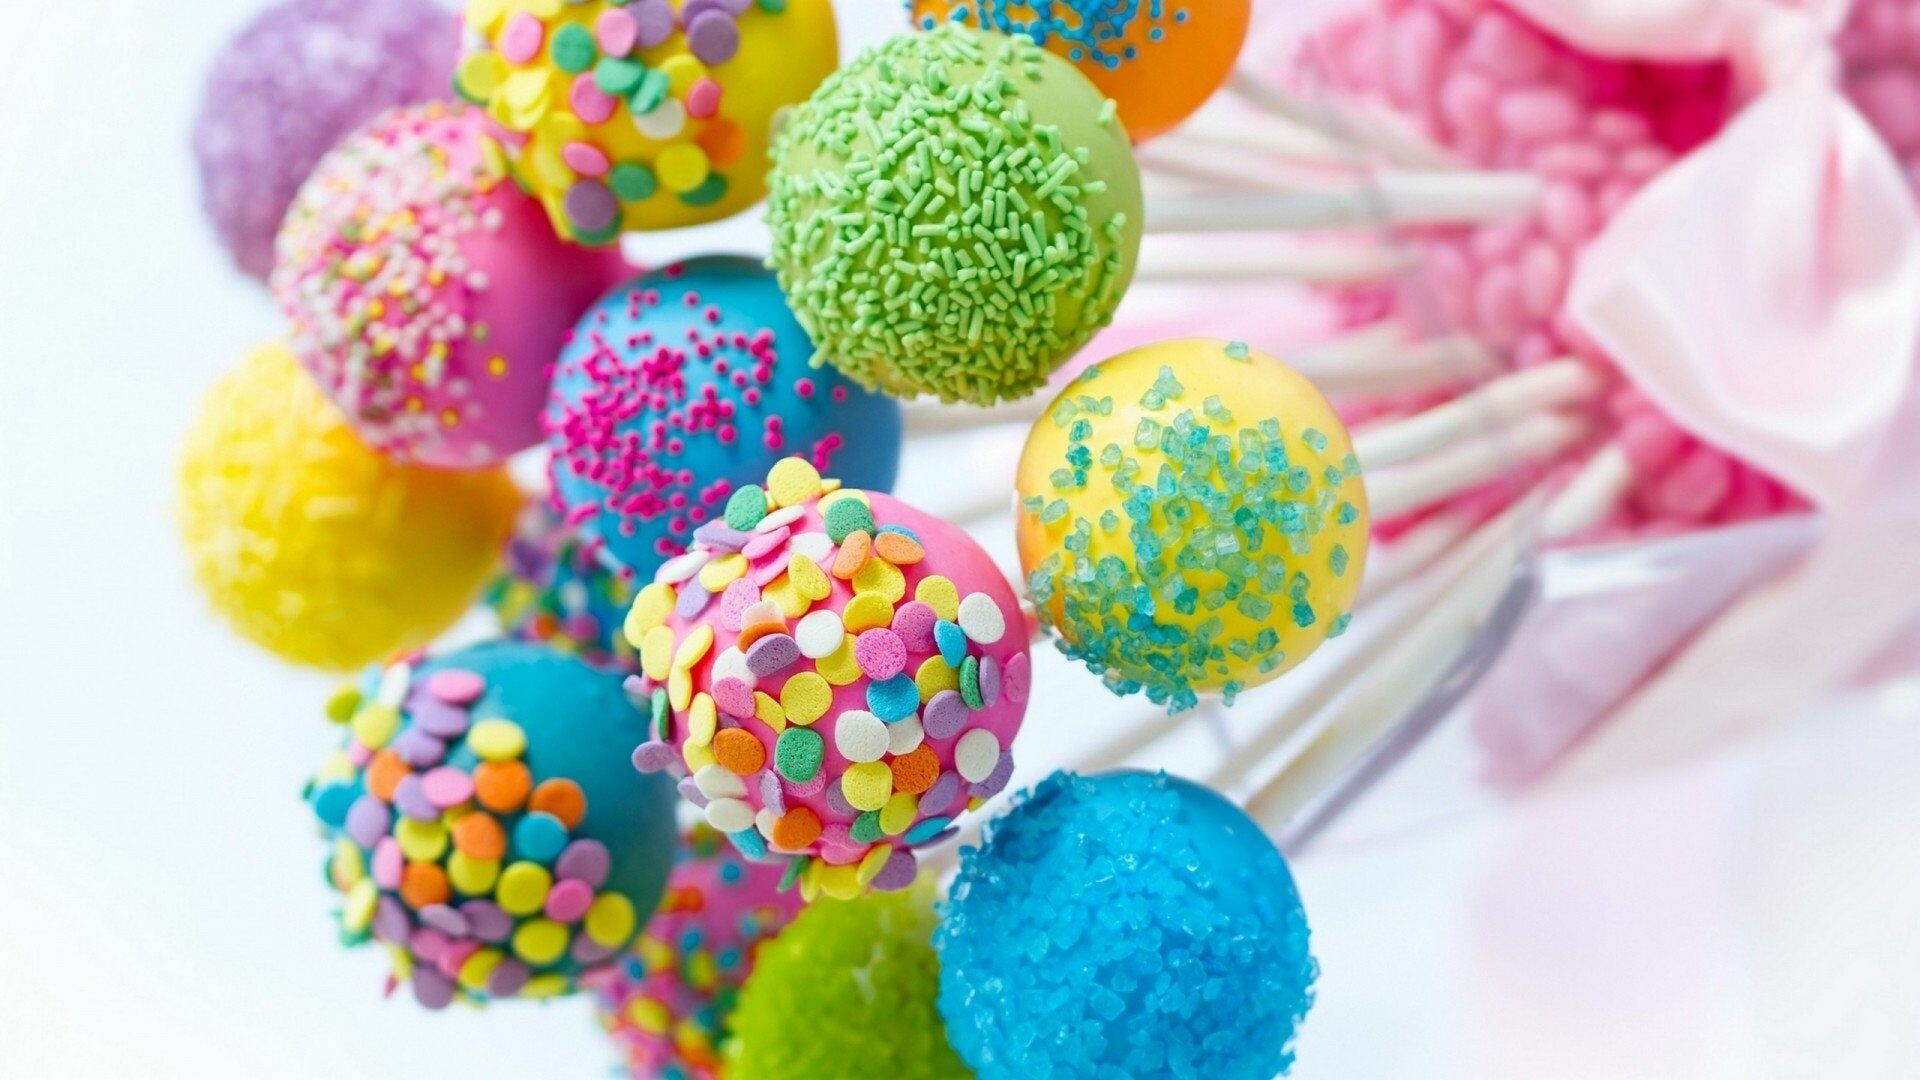 Sweets: A lollipop, A type of sugar candy usually consisting of hard candy mounted on a stick. 1920x1080 Full HD Background.